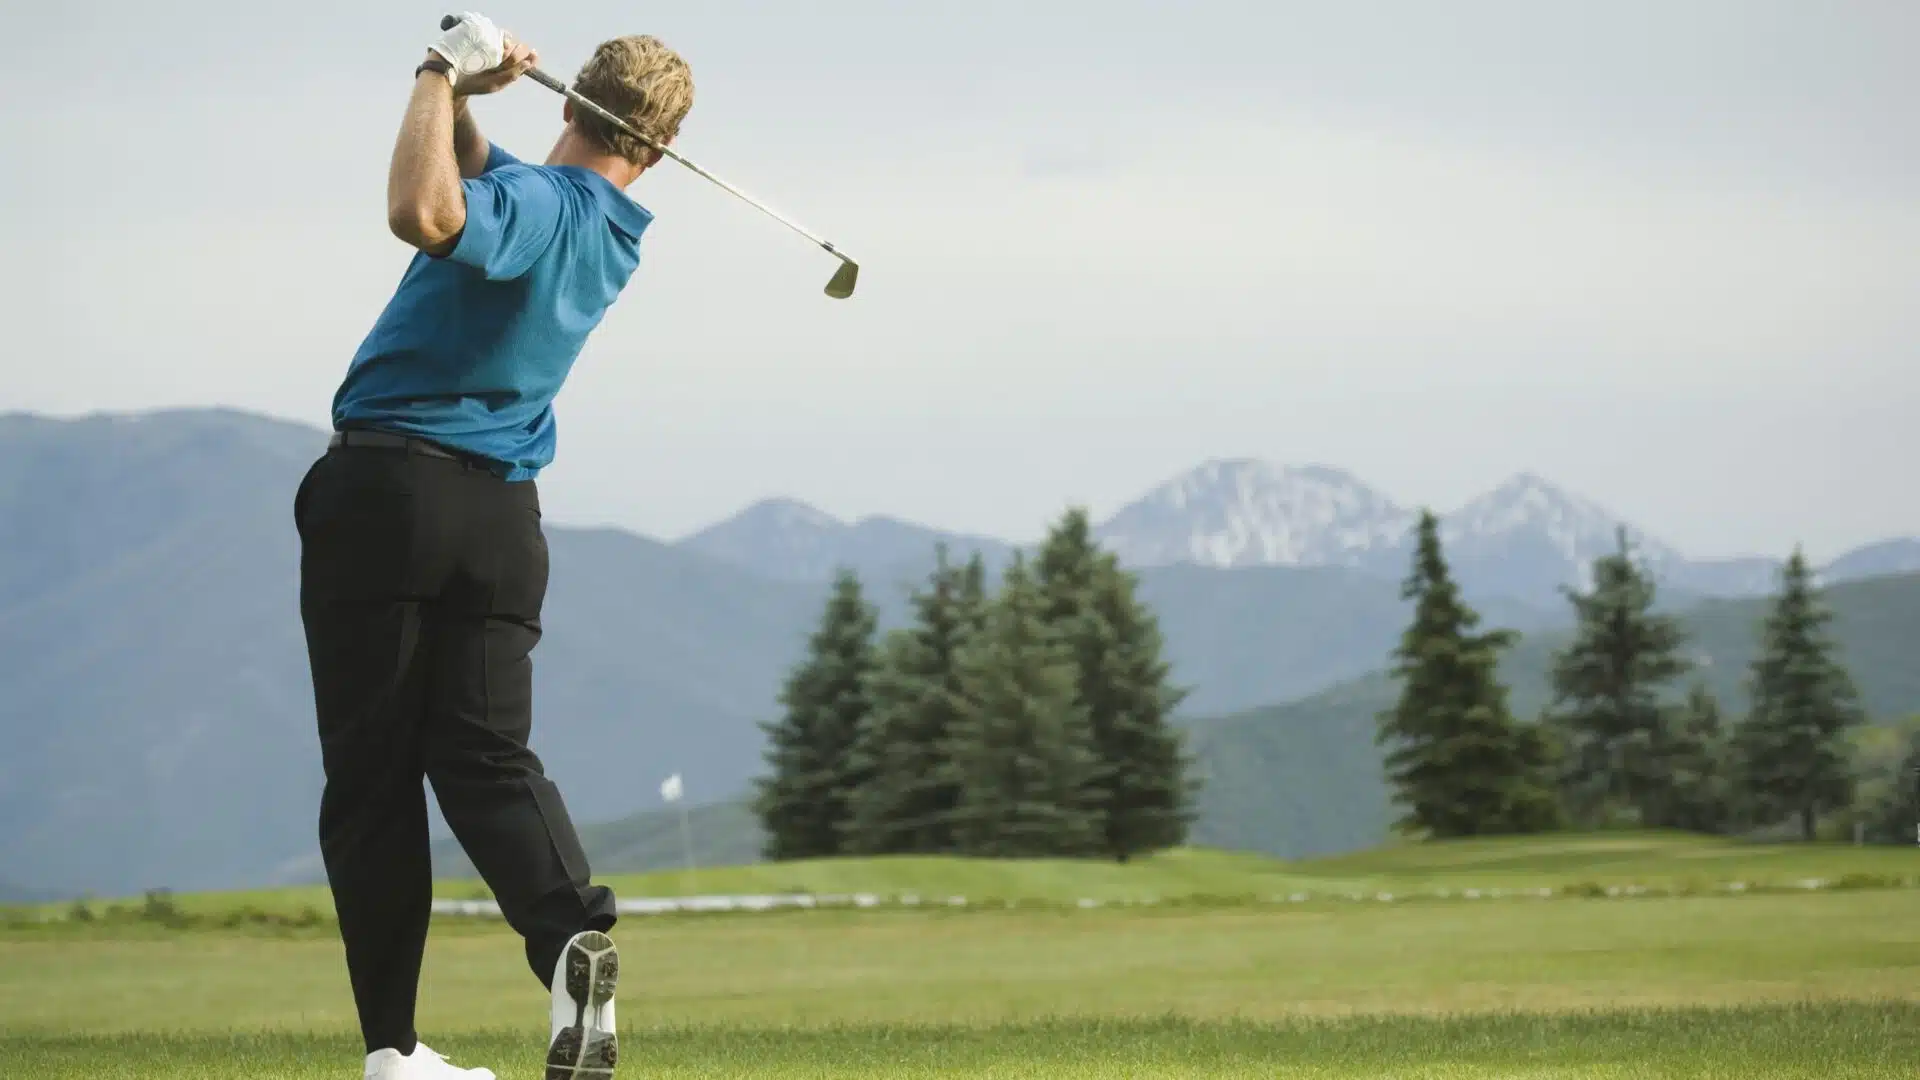 A man swinging a golf club with a backdrop of beautiful mountains